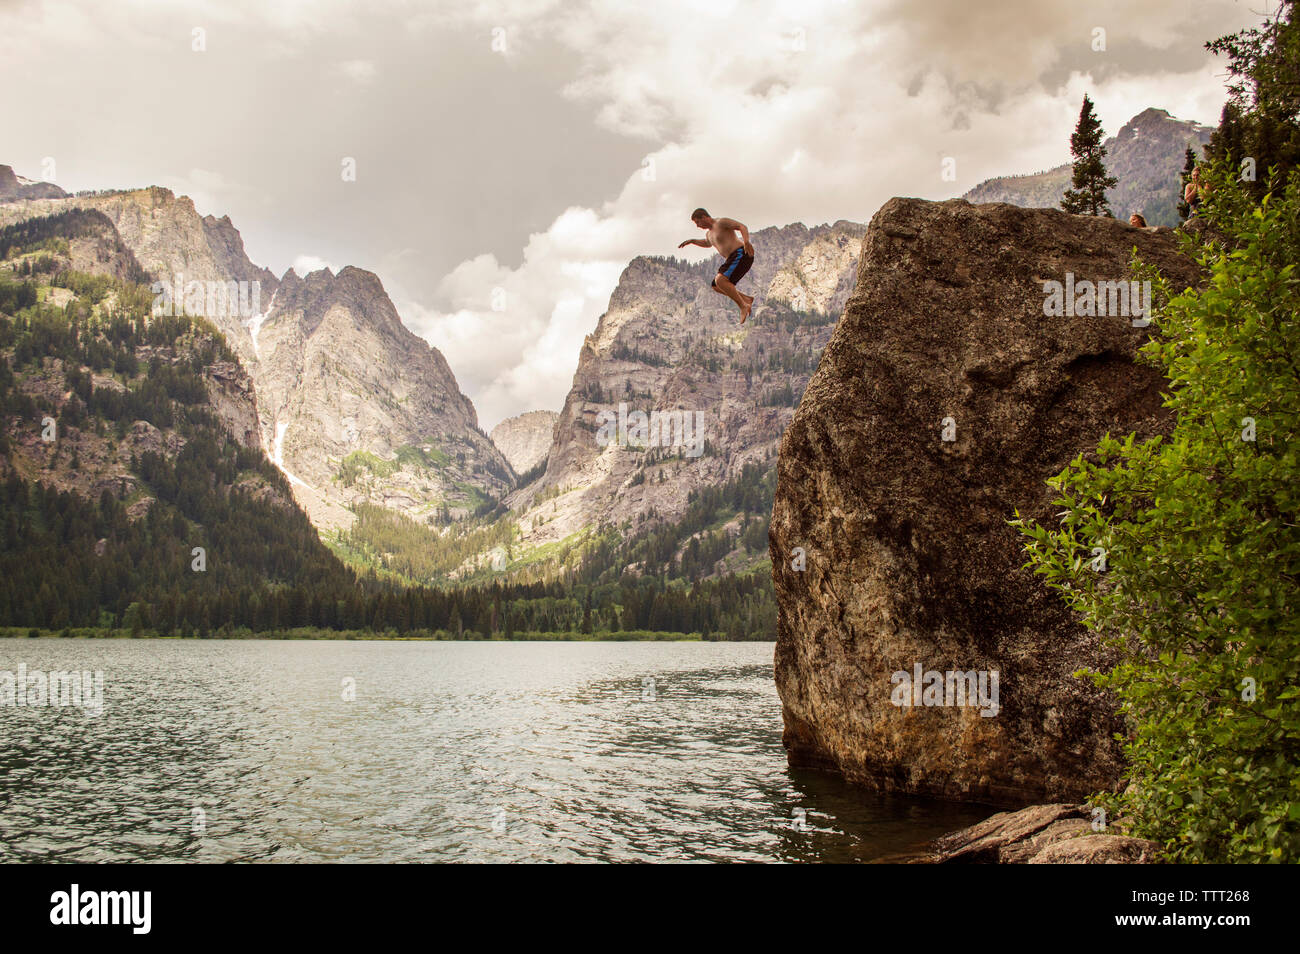 Man jumping from cliff into lake against mountains Stock Photo